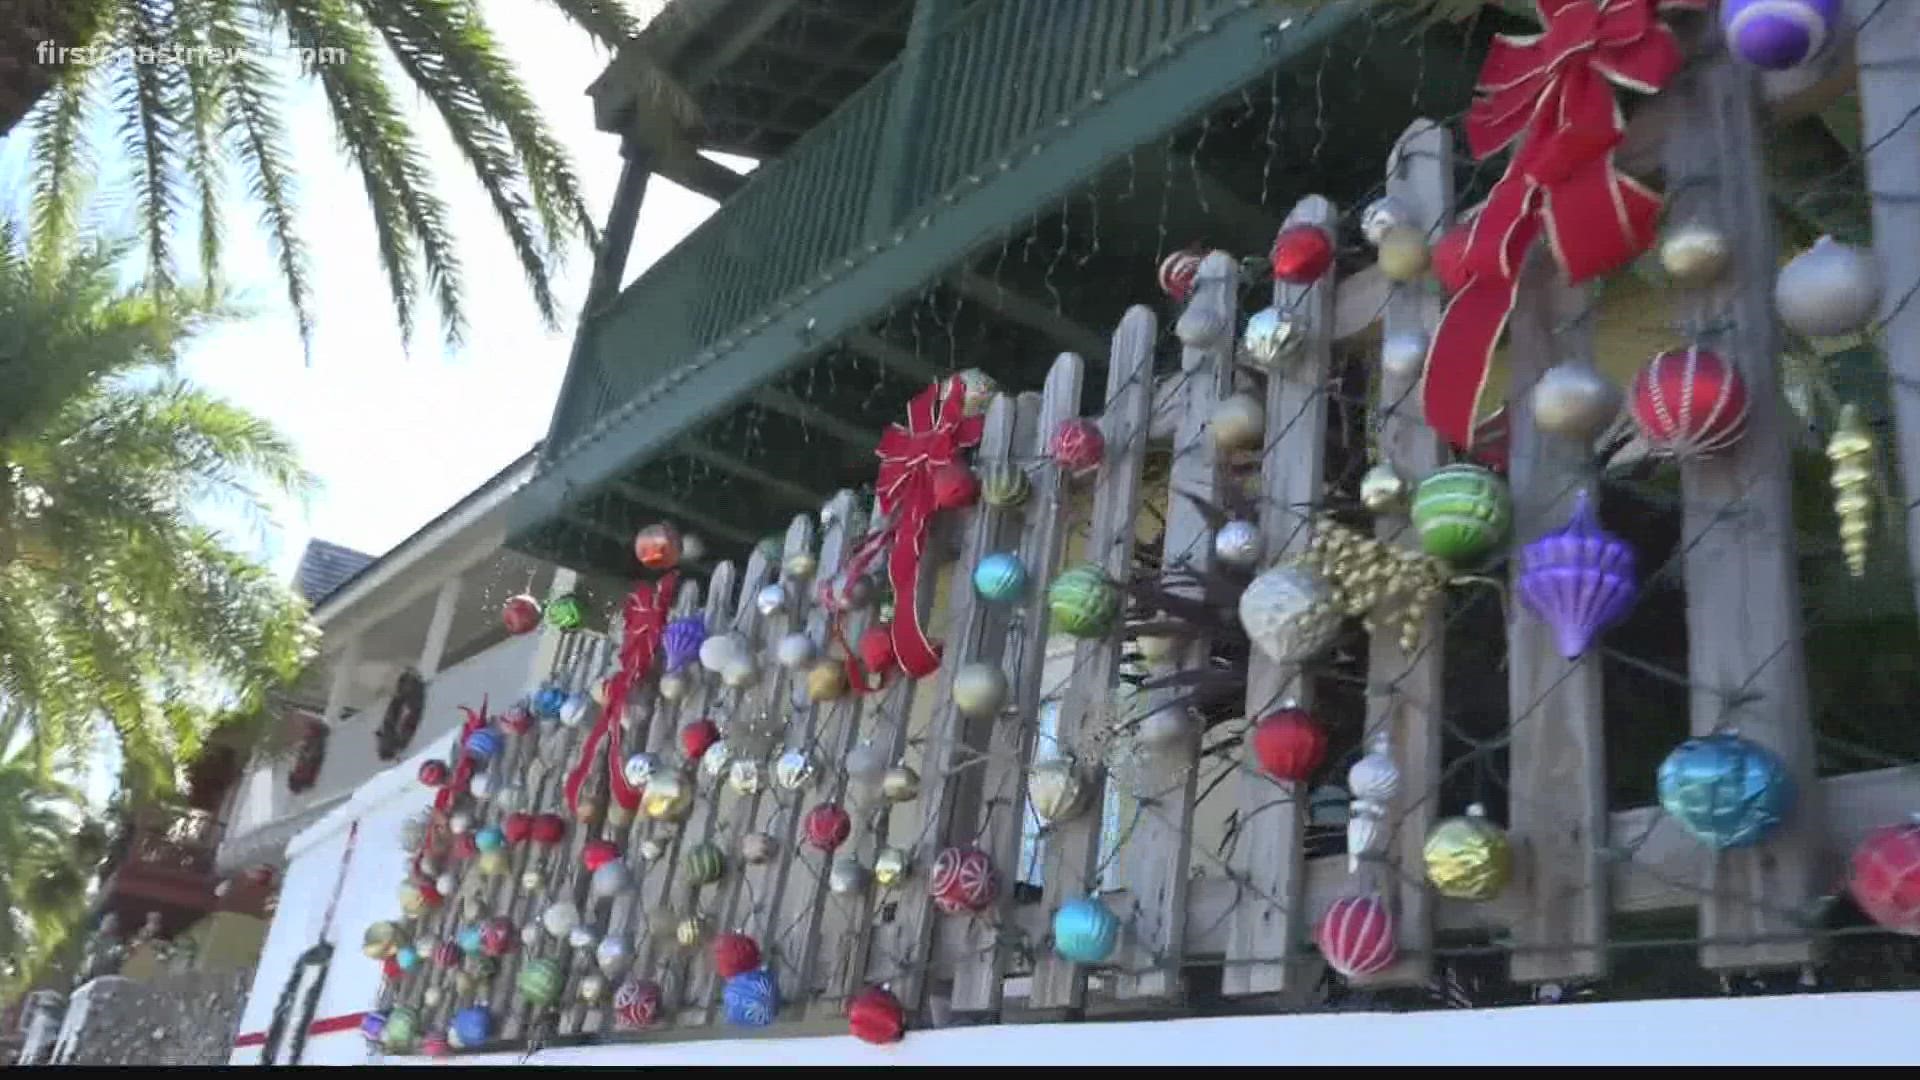 Community members are looking to extend Nights of Lights to bring more tourists to the area.